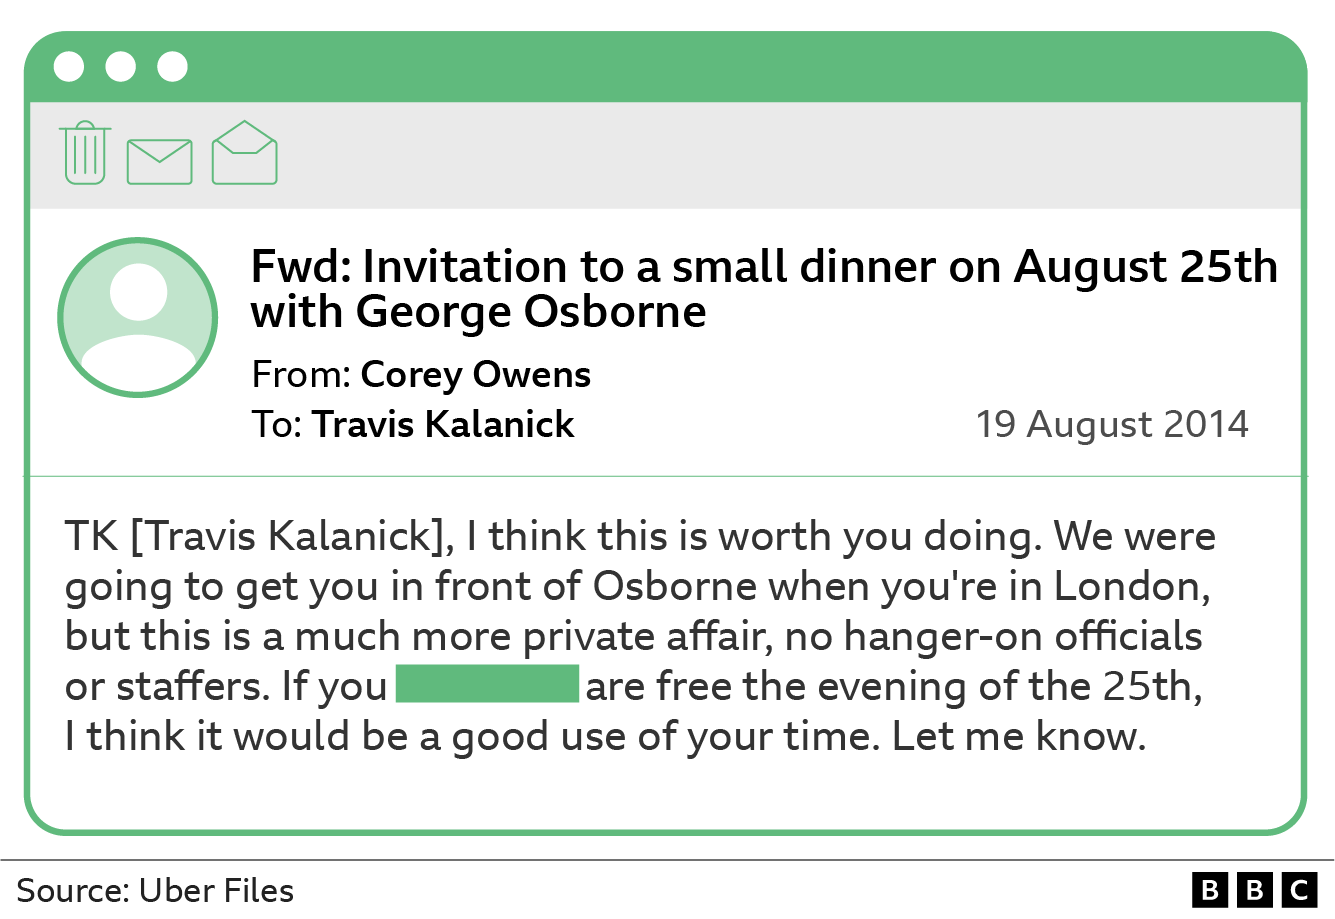 Email reading: Travis Kalanick I think this is worth you doing. We were going to get you in front of Osborne when you're in London but this is a much more private affair, no hangeron officials or staffers. If you... are free the evening of the 25th, I think it would be a good use of your time. Let me know.